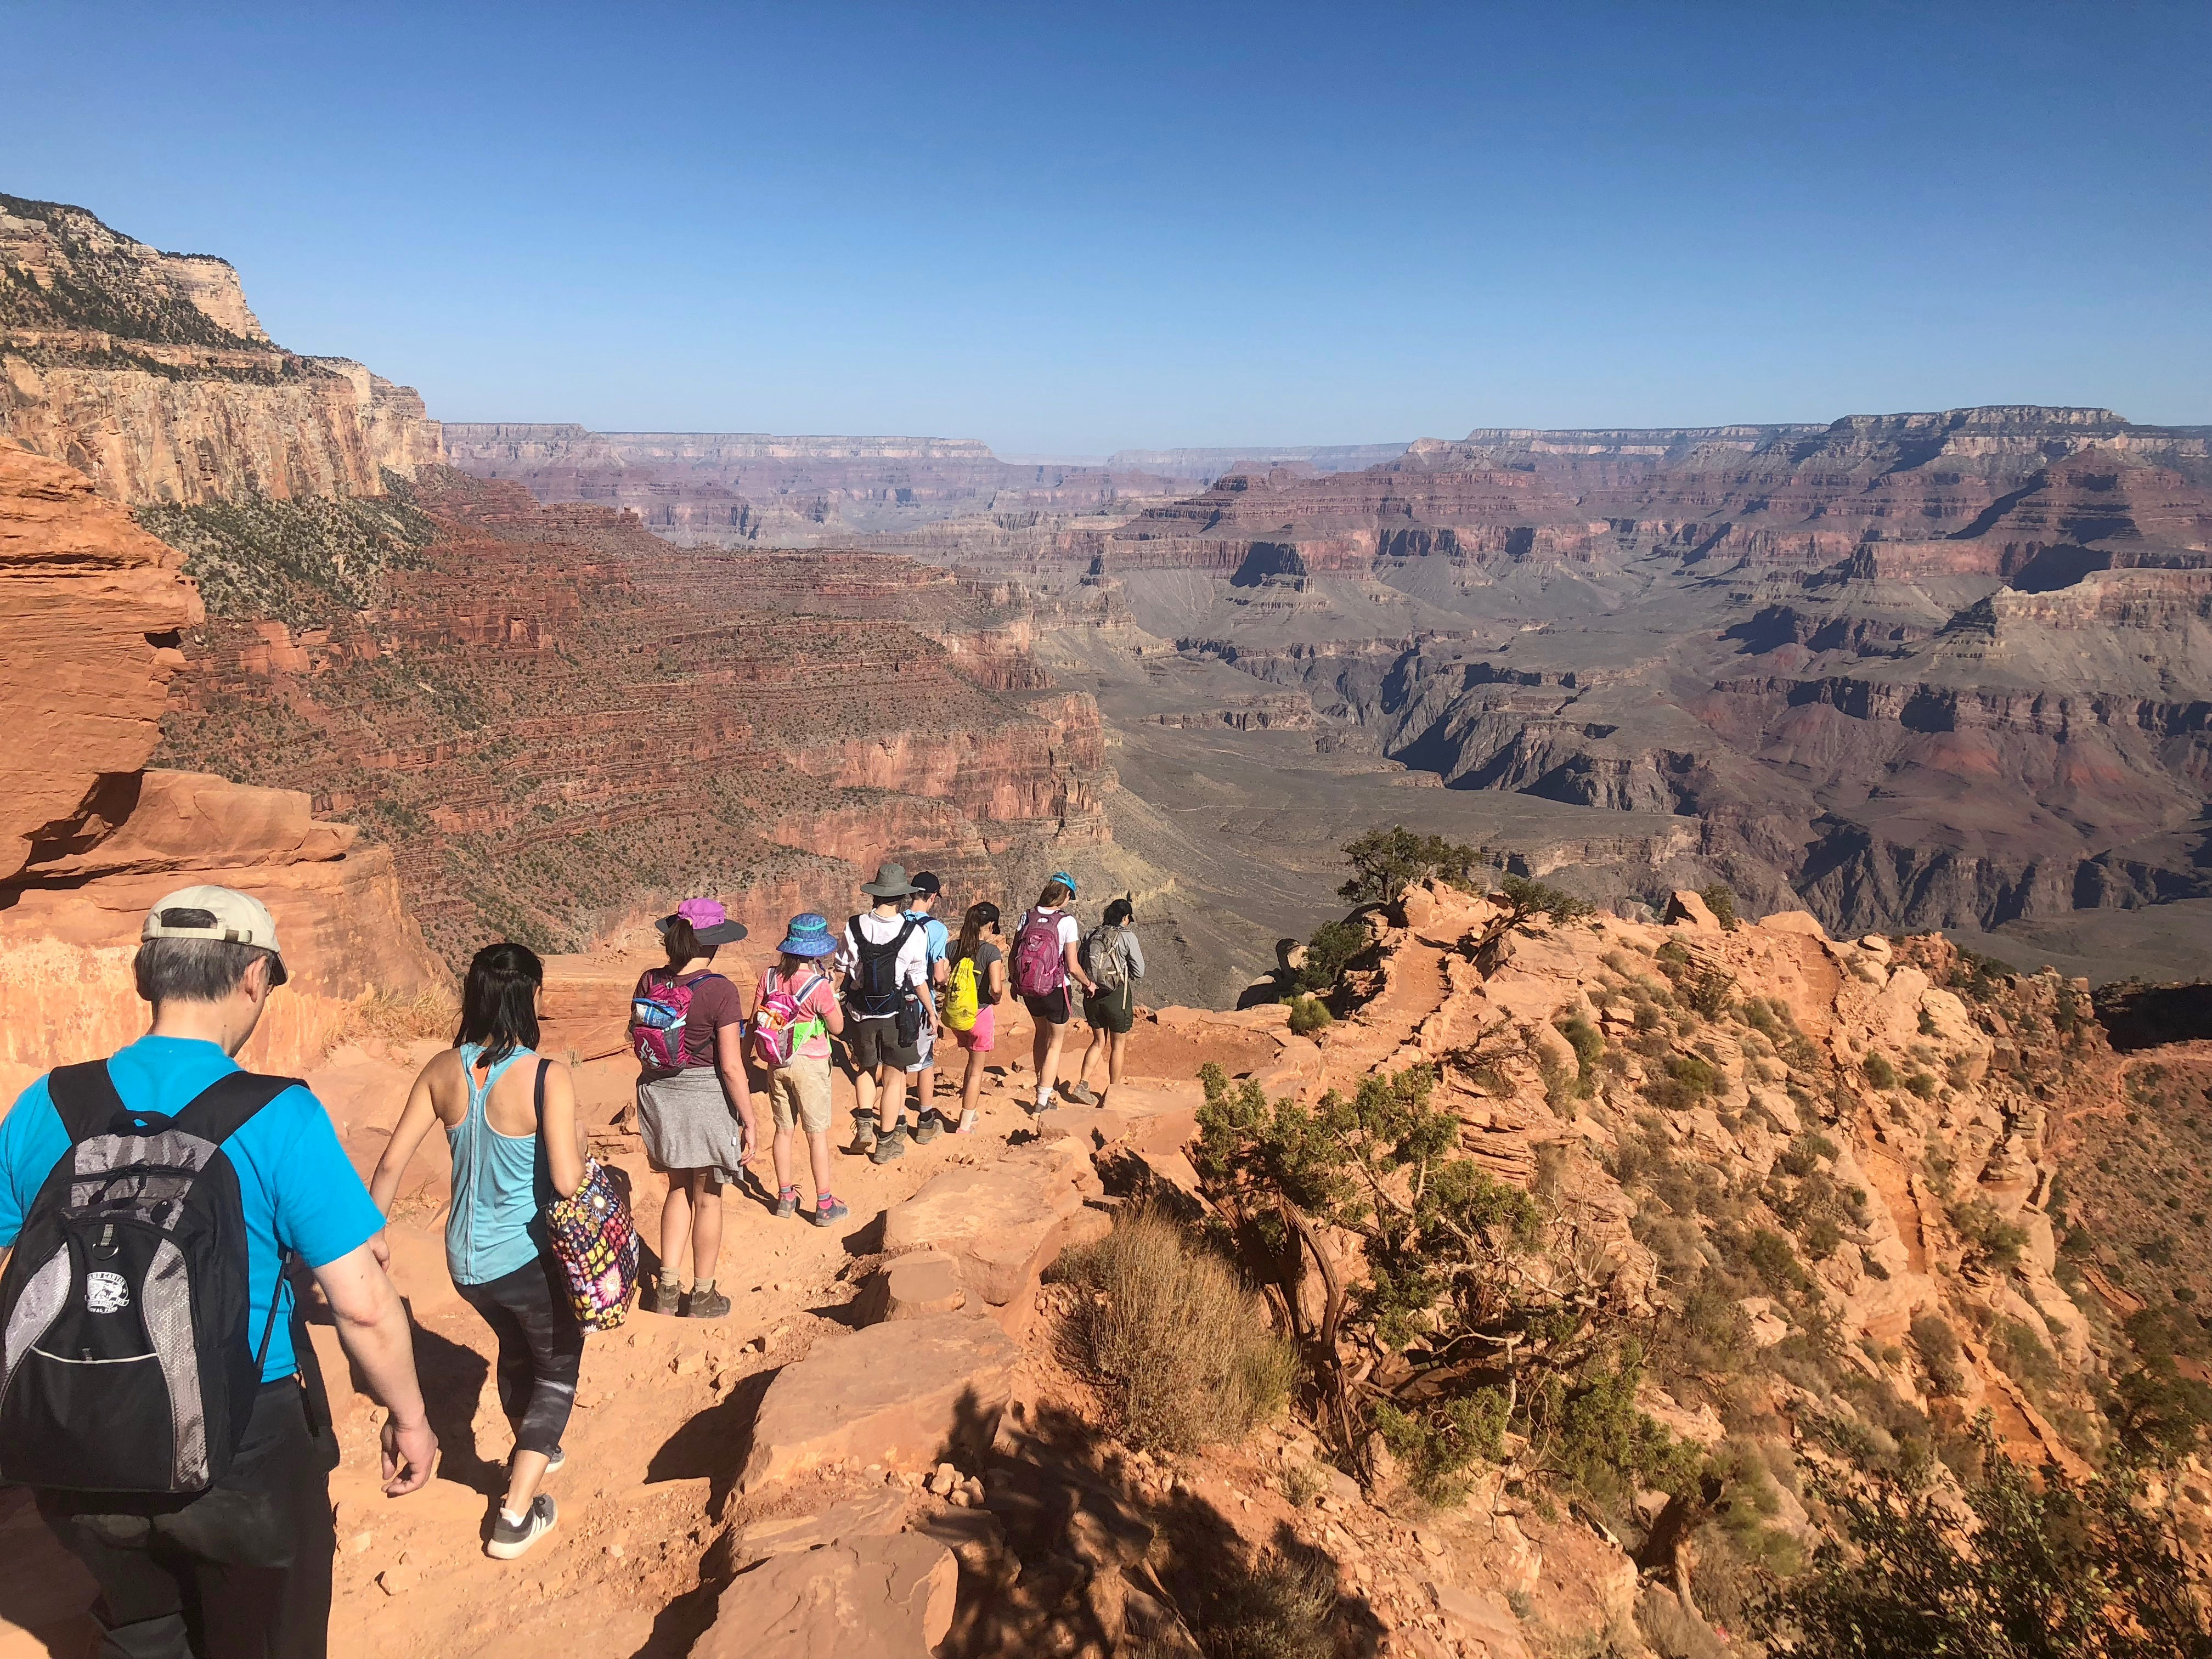 Archive of 2019 Park Centennial Events Grand Canyon National Park (U